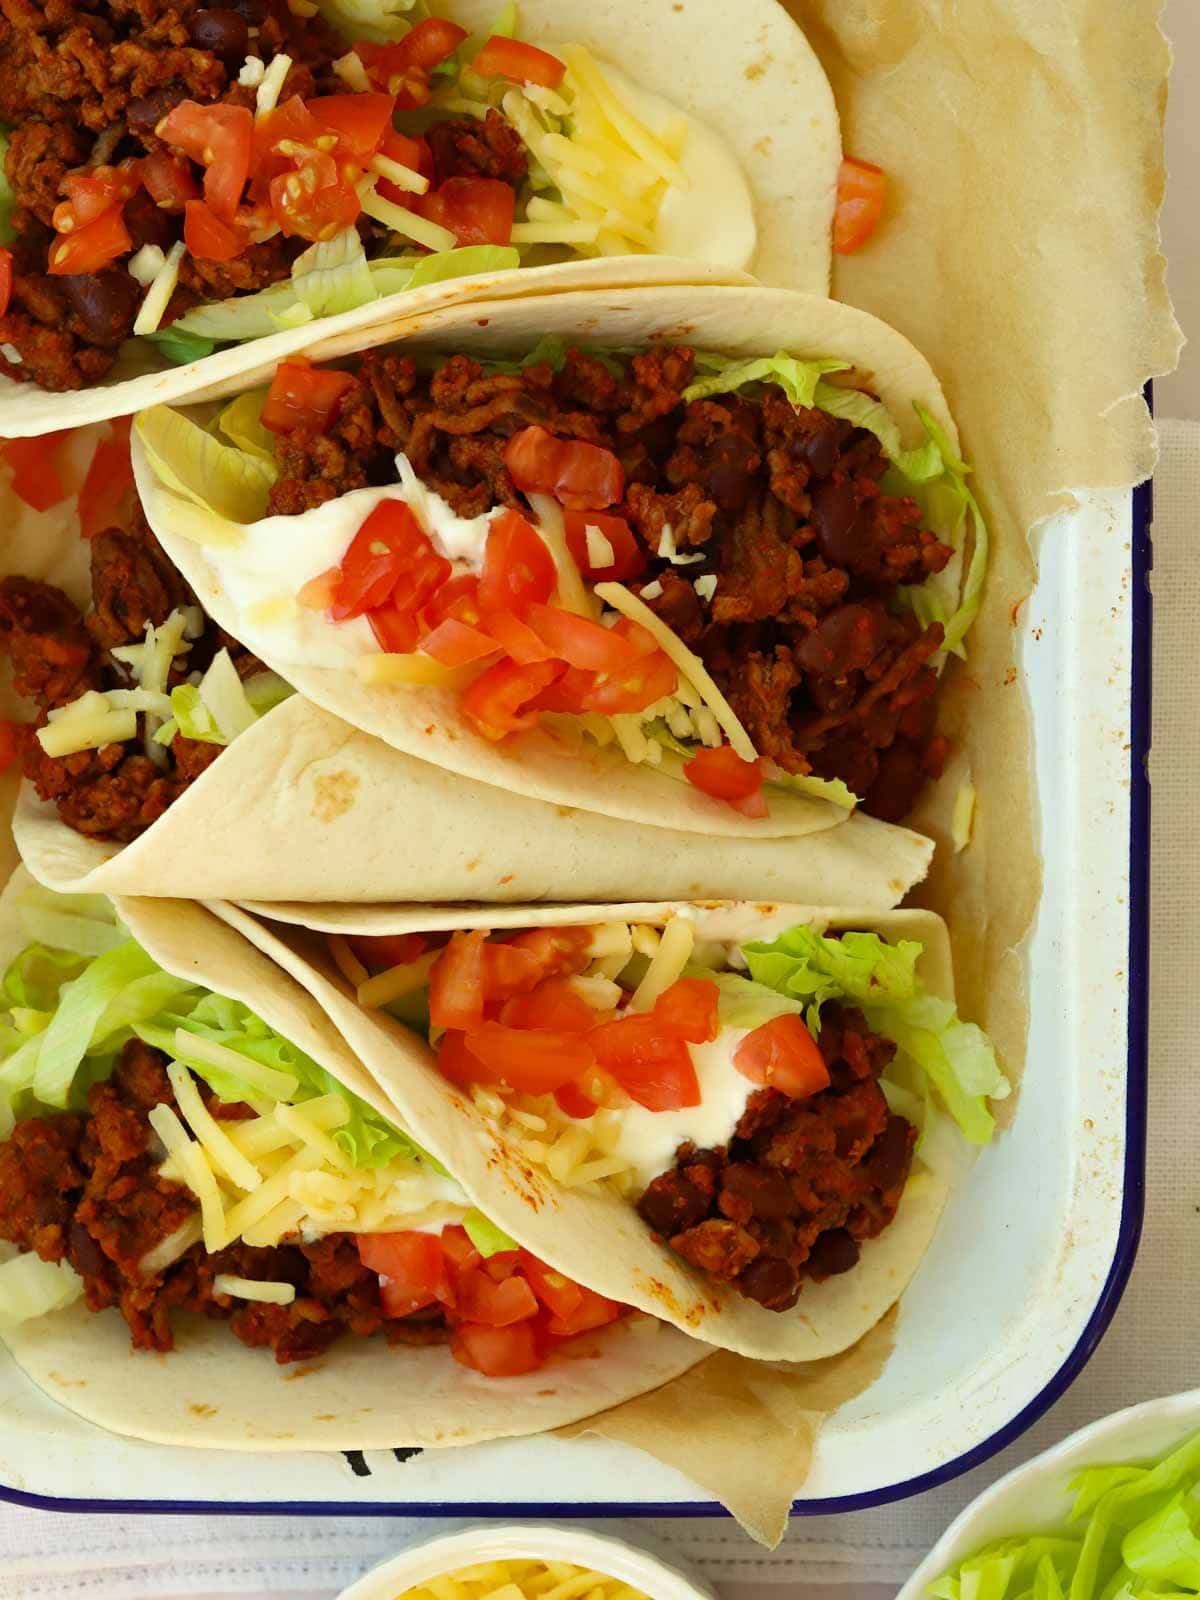 A baking tray filled with beef tacos and stuffed with salad.